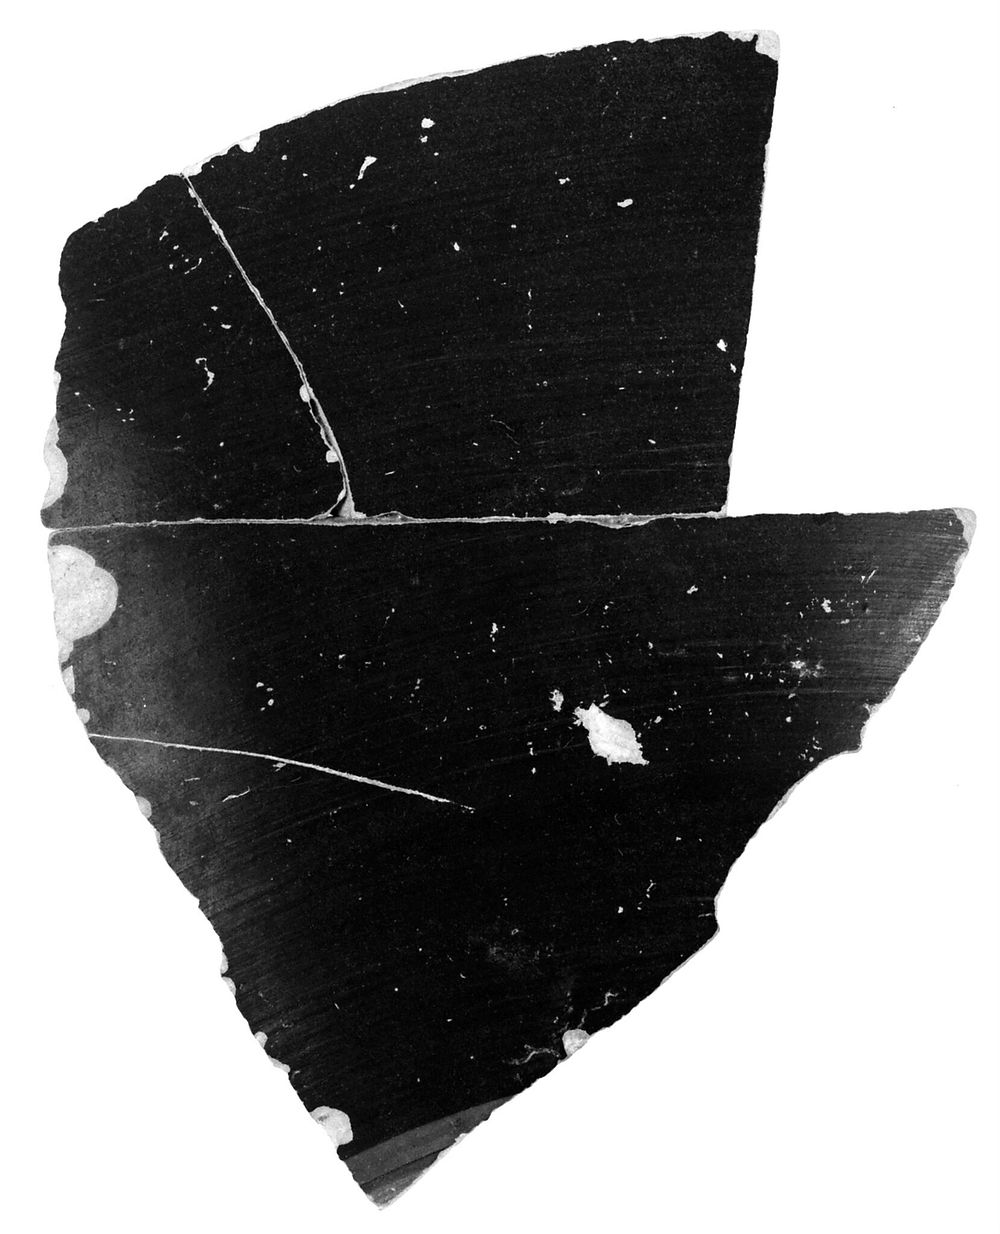 Attic Panathenaic Amphora Fragment (comprised of 3 Joined Fragments) by Euphiletos Painter